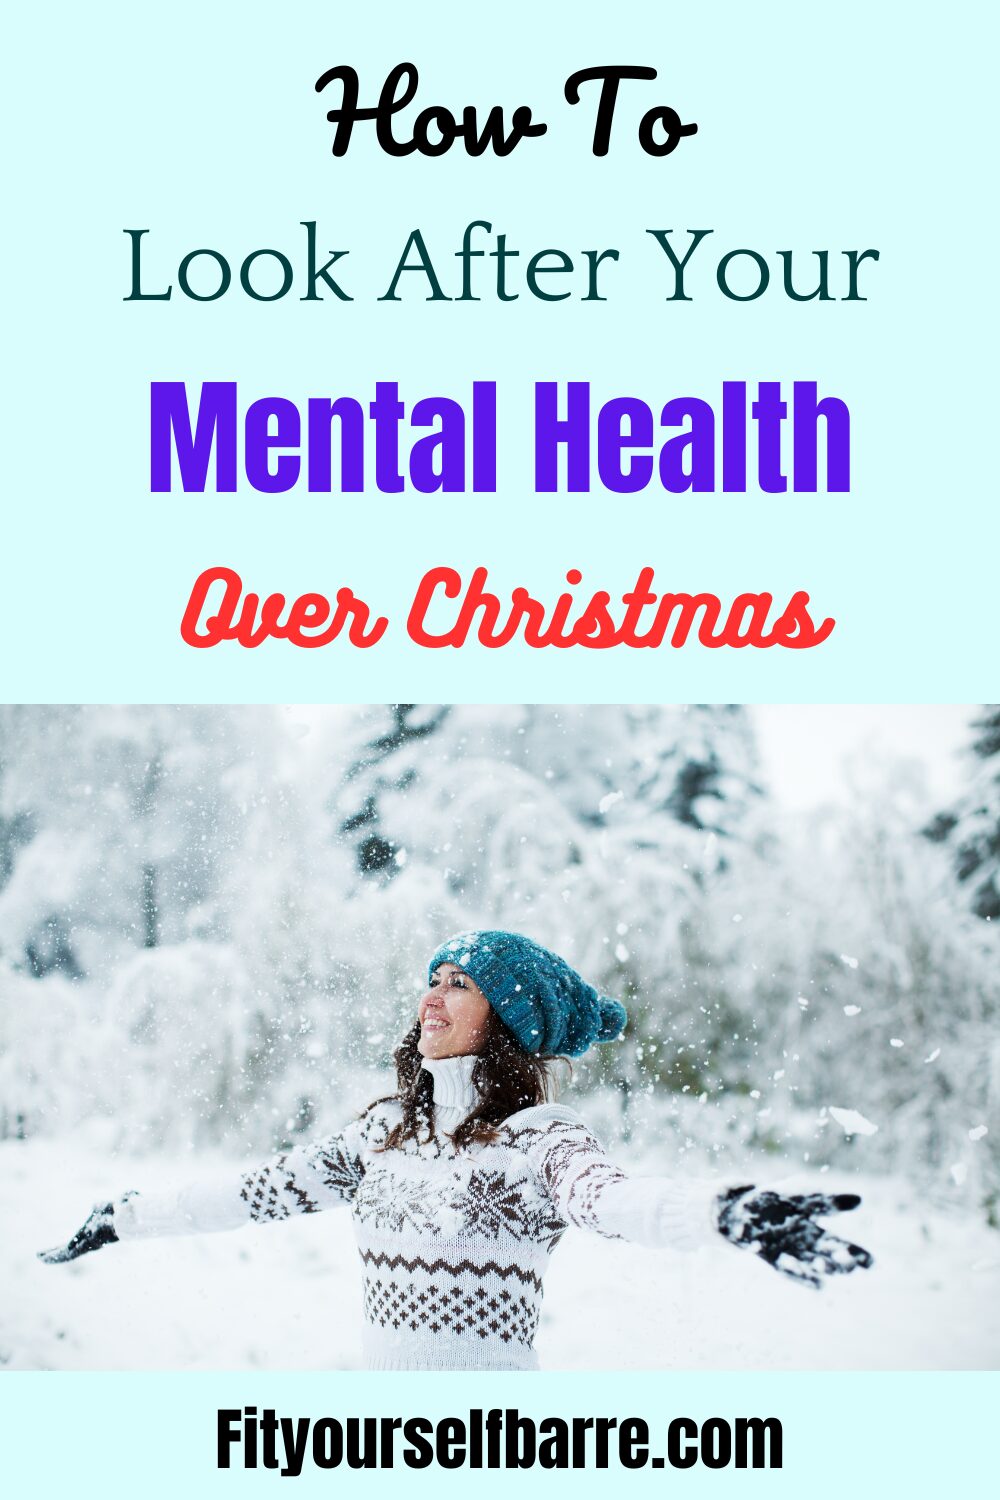 Christmas Mental health tips-woman playing with snow in winter forest